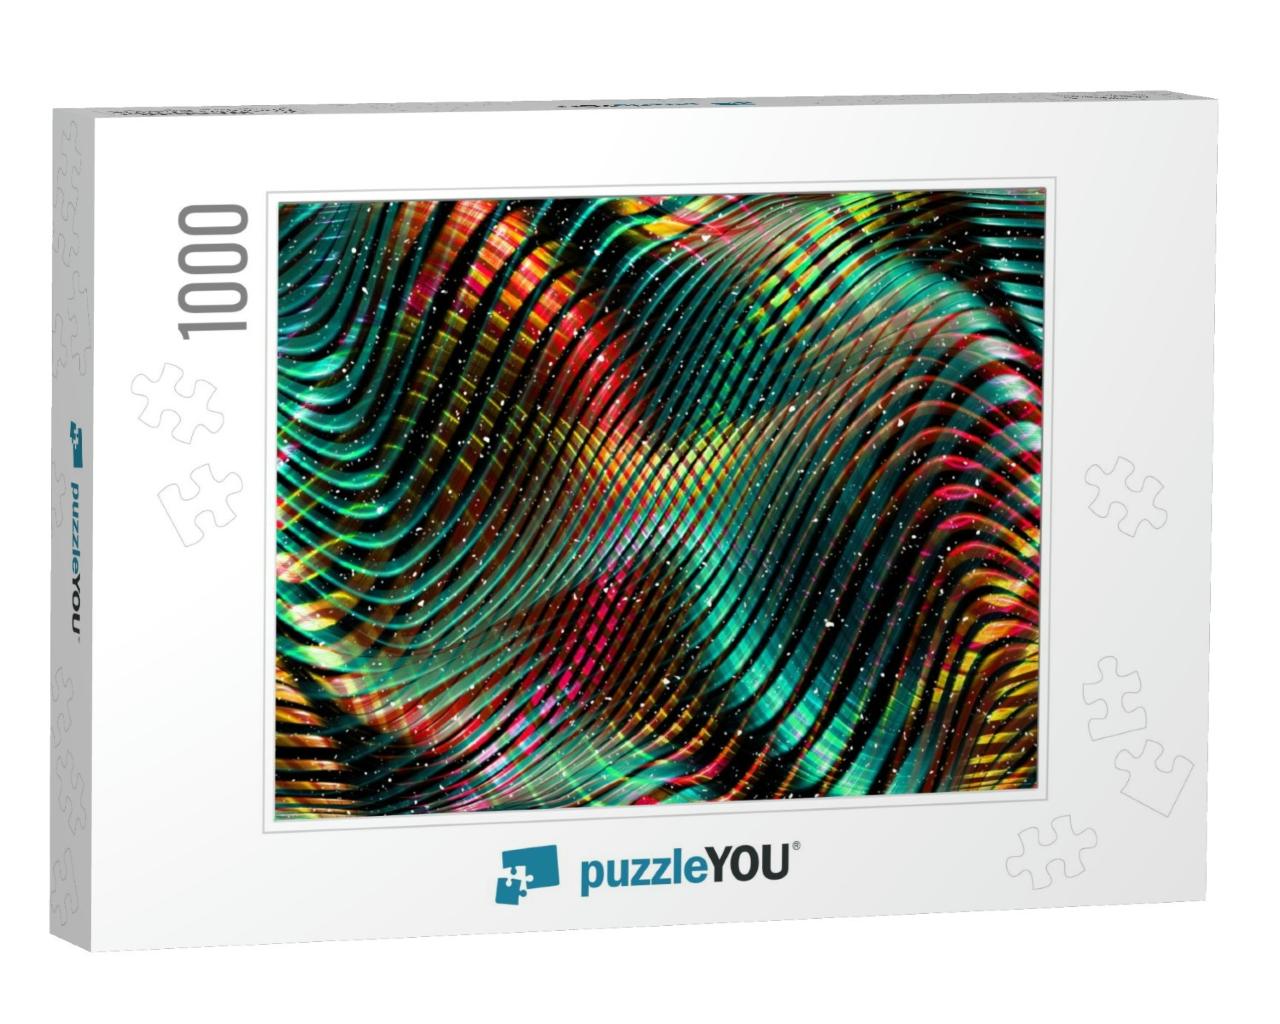 Digital Painted Abstract Design, Colorful Grunge Texture... Jigsaw Puzzle with 1000 pieces